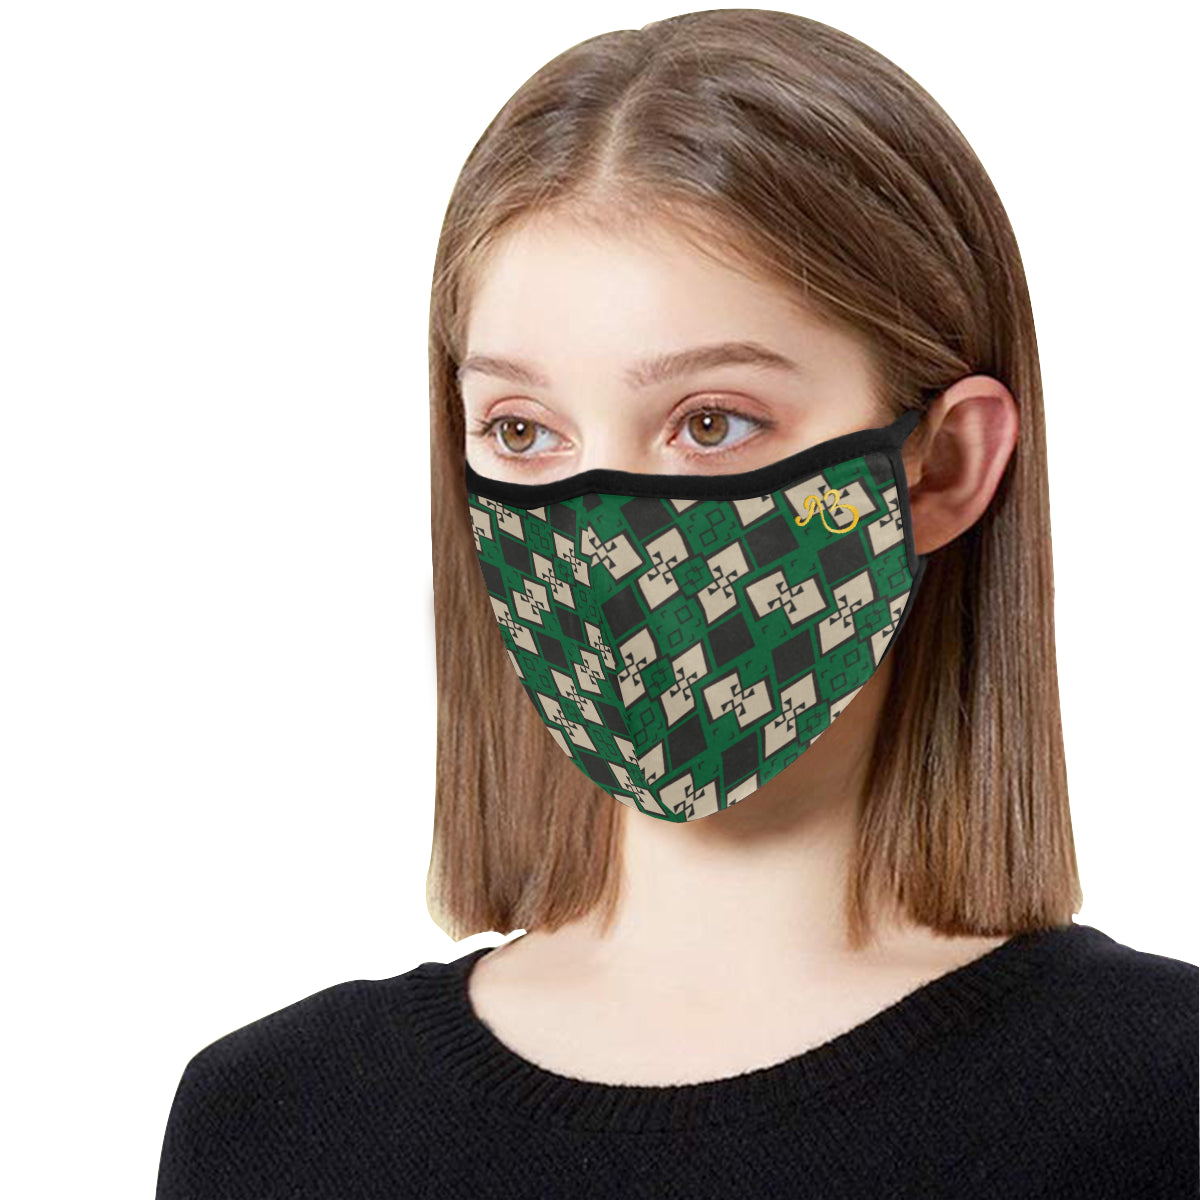 Aztek Print Cotton Fabric Face Mask with filter slot (30 Filters Included) - Non-medical use